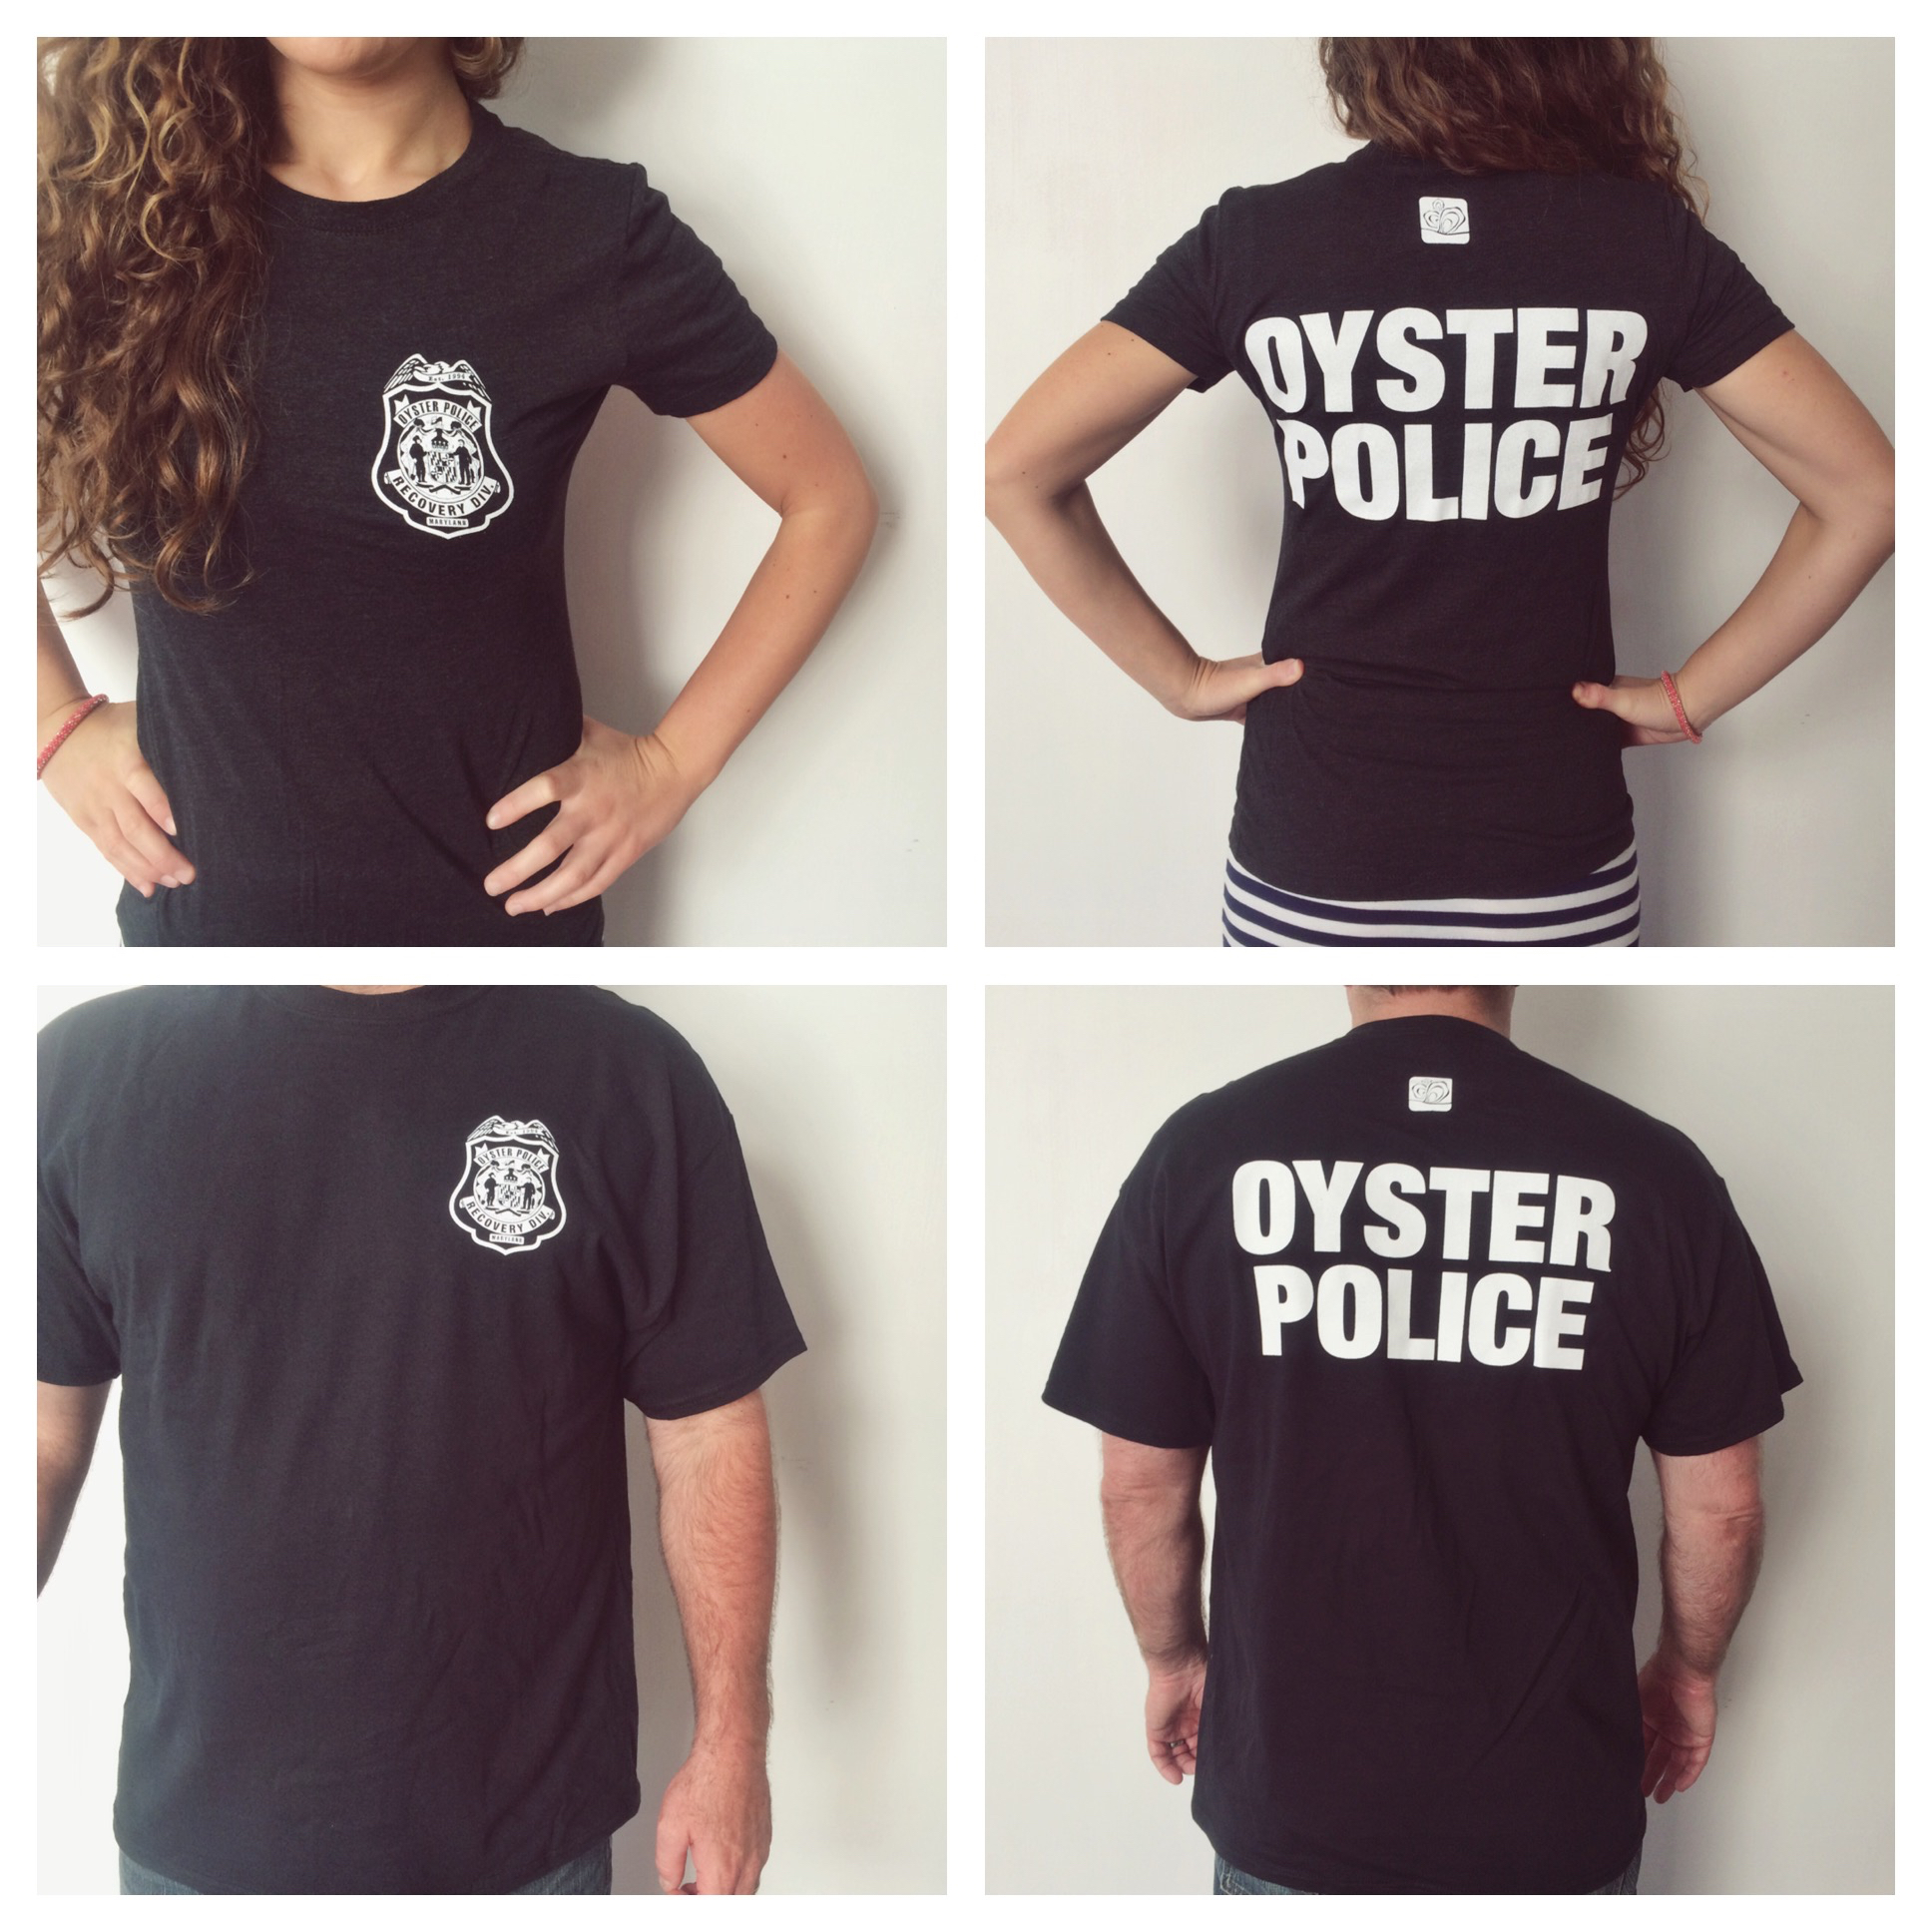 oyster police shirts